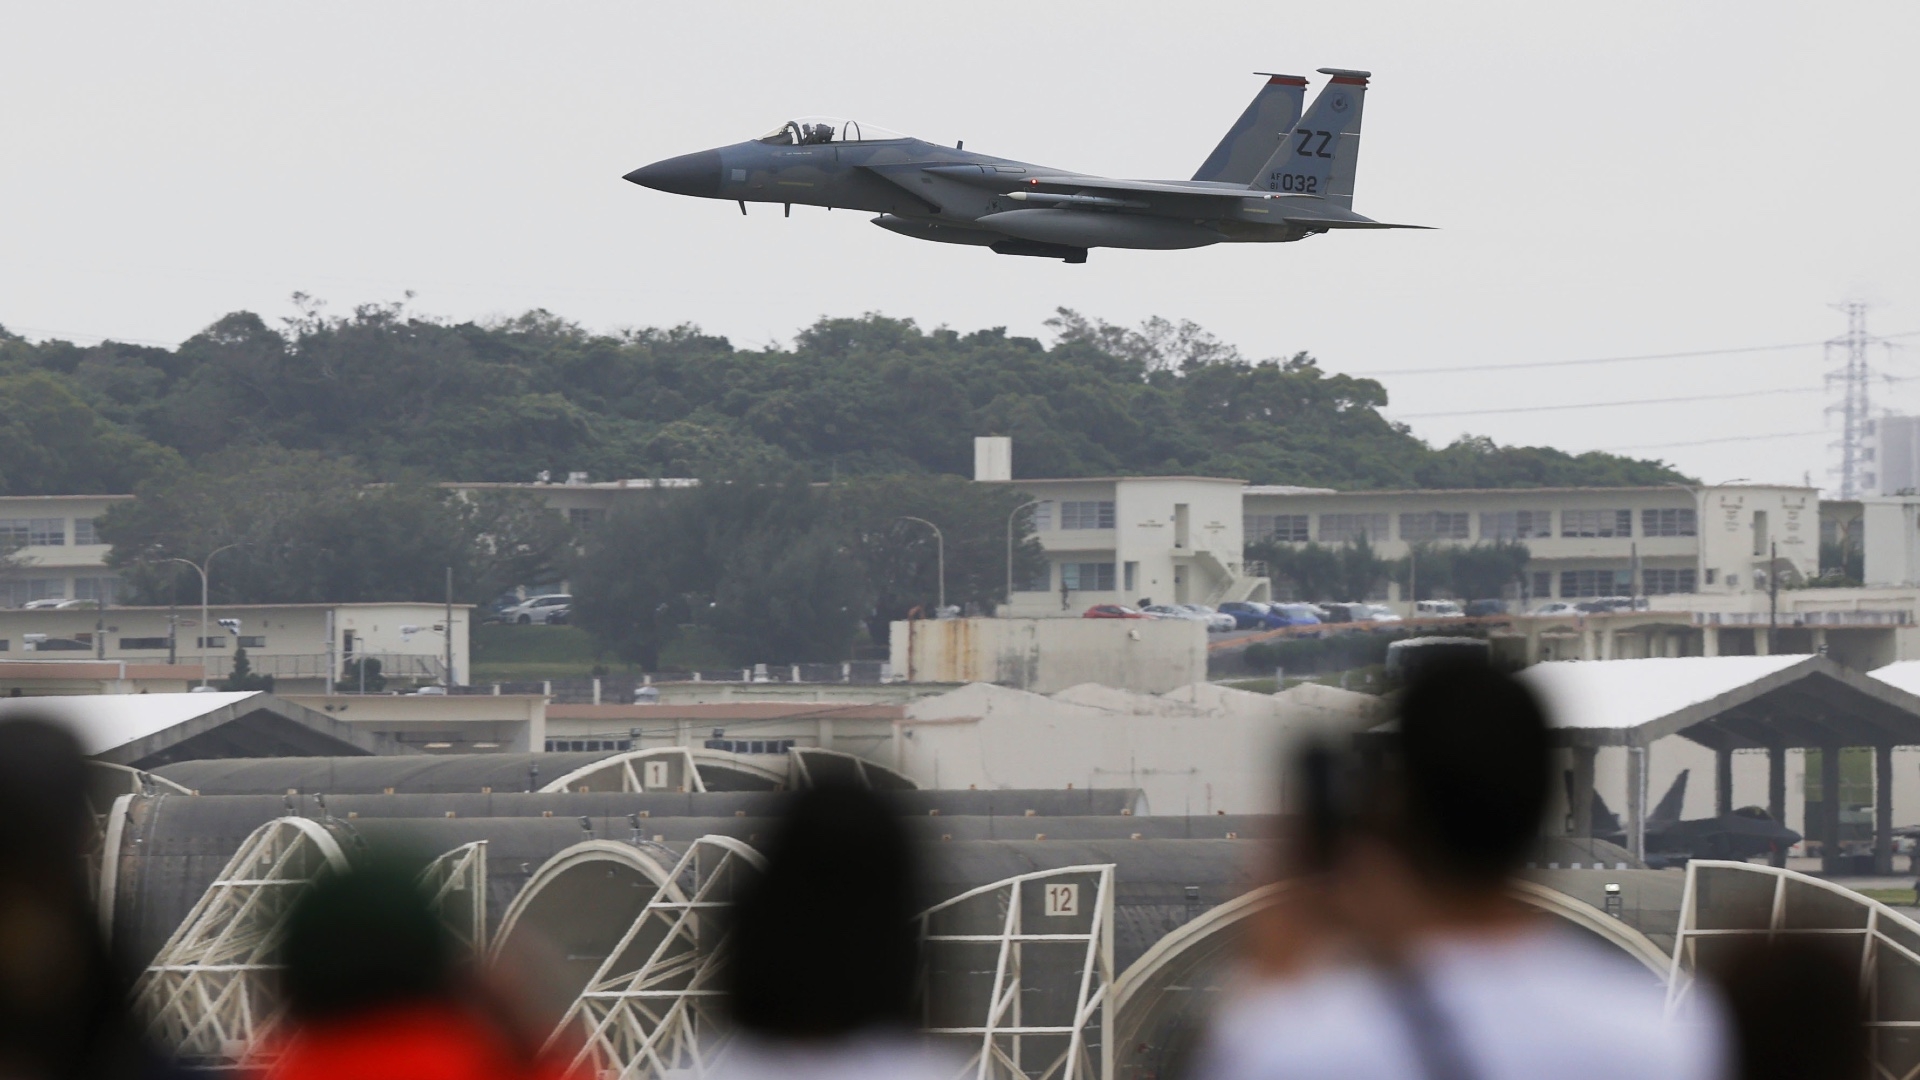 Observers look on as an F-15 Strike Eagle, the only fighter jet fitted with JDAM and GBU-39 munitions, flies at the US Air Force's Kadena base in Okinawa Prefecture, southern Japan, on 14 December 2022 (Kyodo via Reuters)